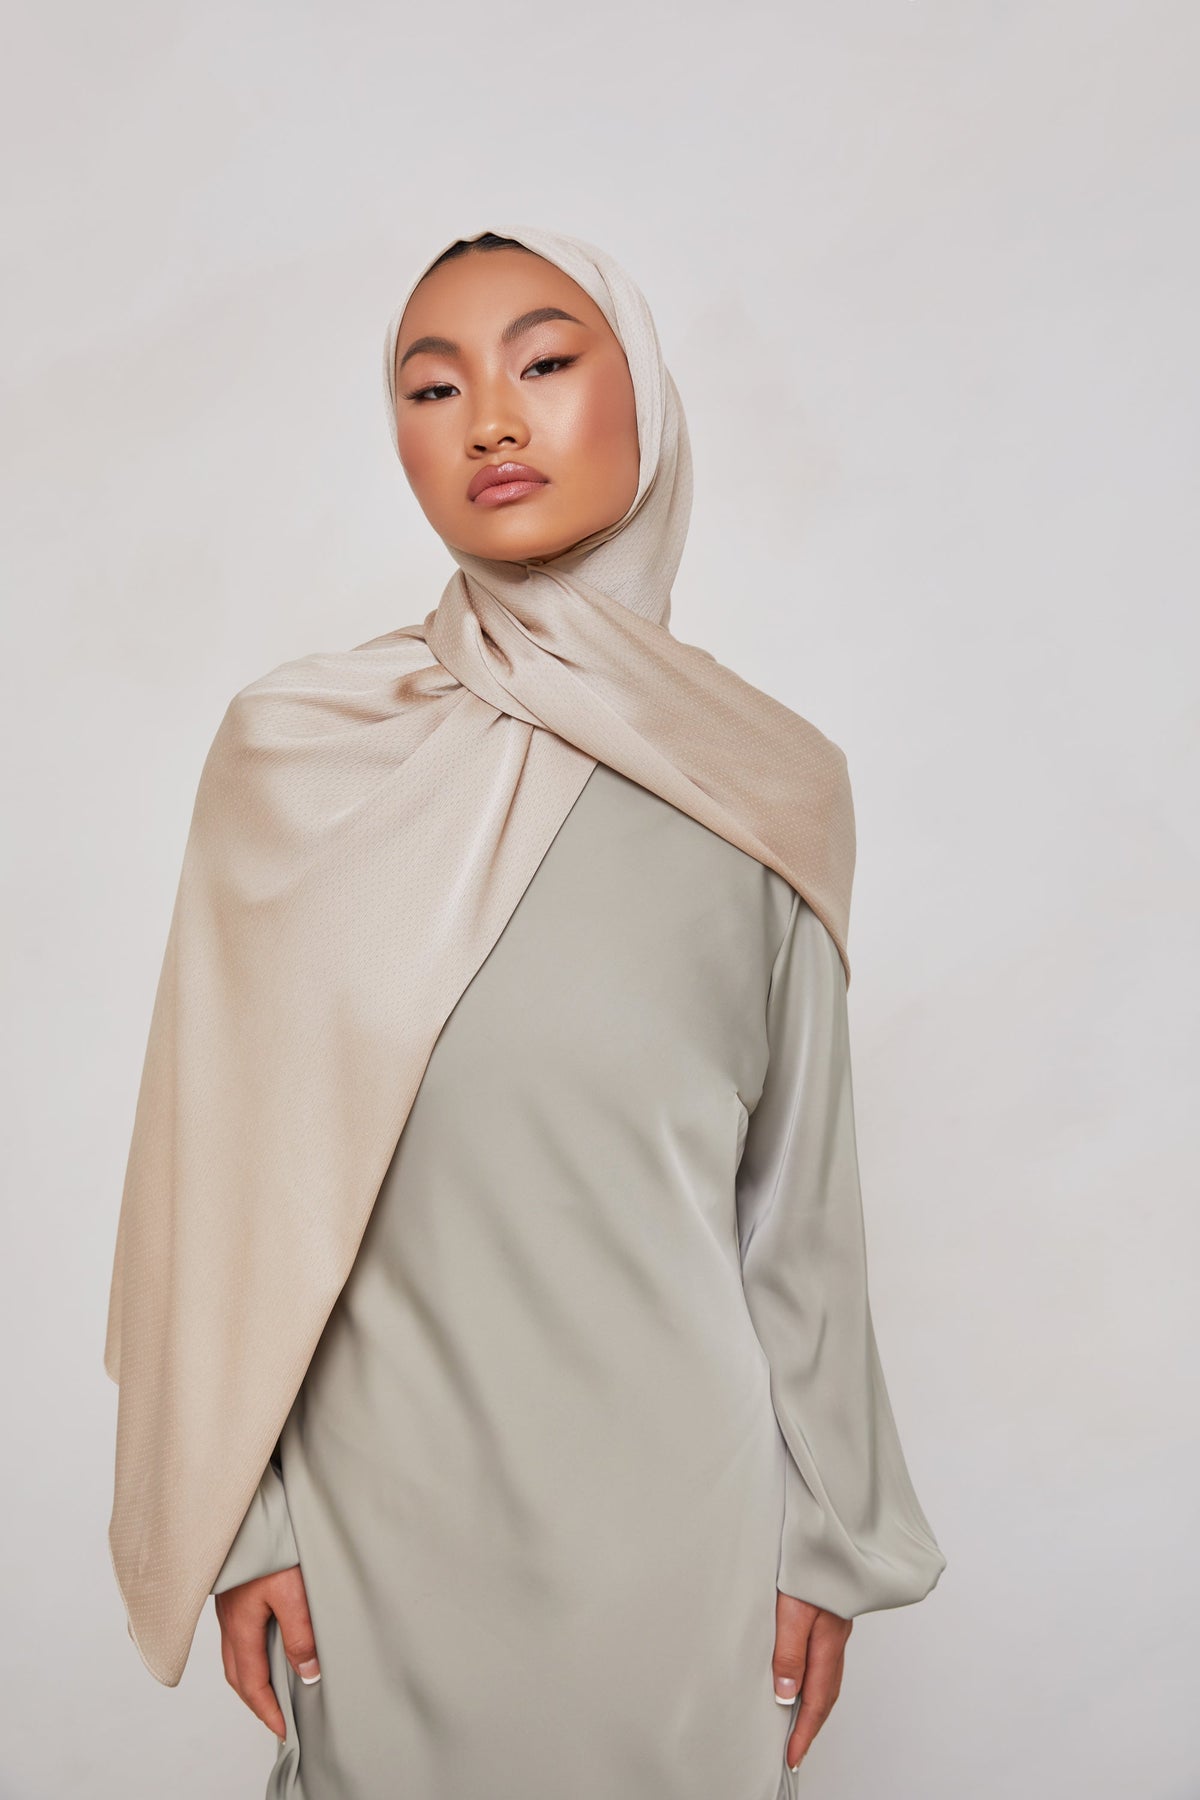 TEXTURE Crepe Hijab - Taupe Dots Veiled Collection 